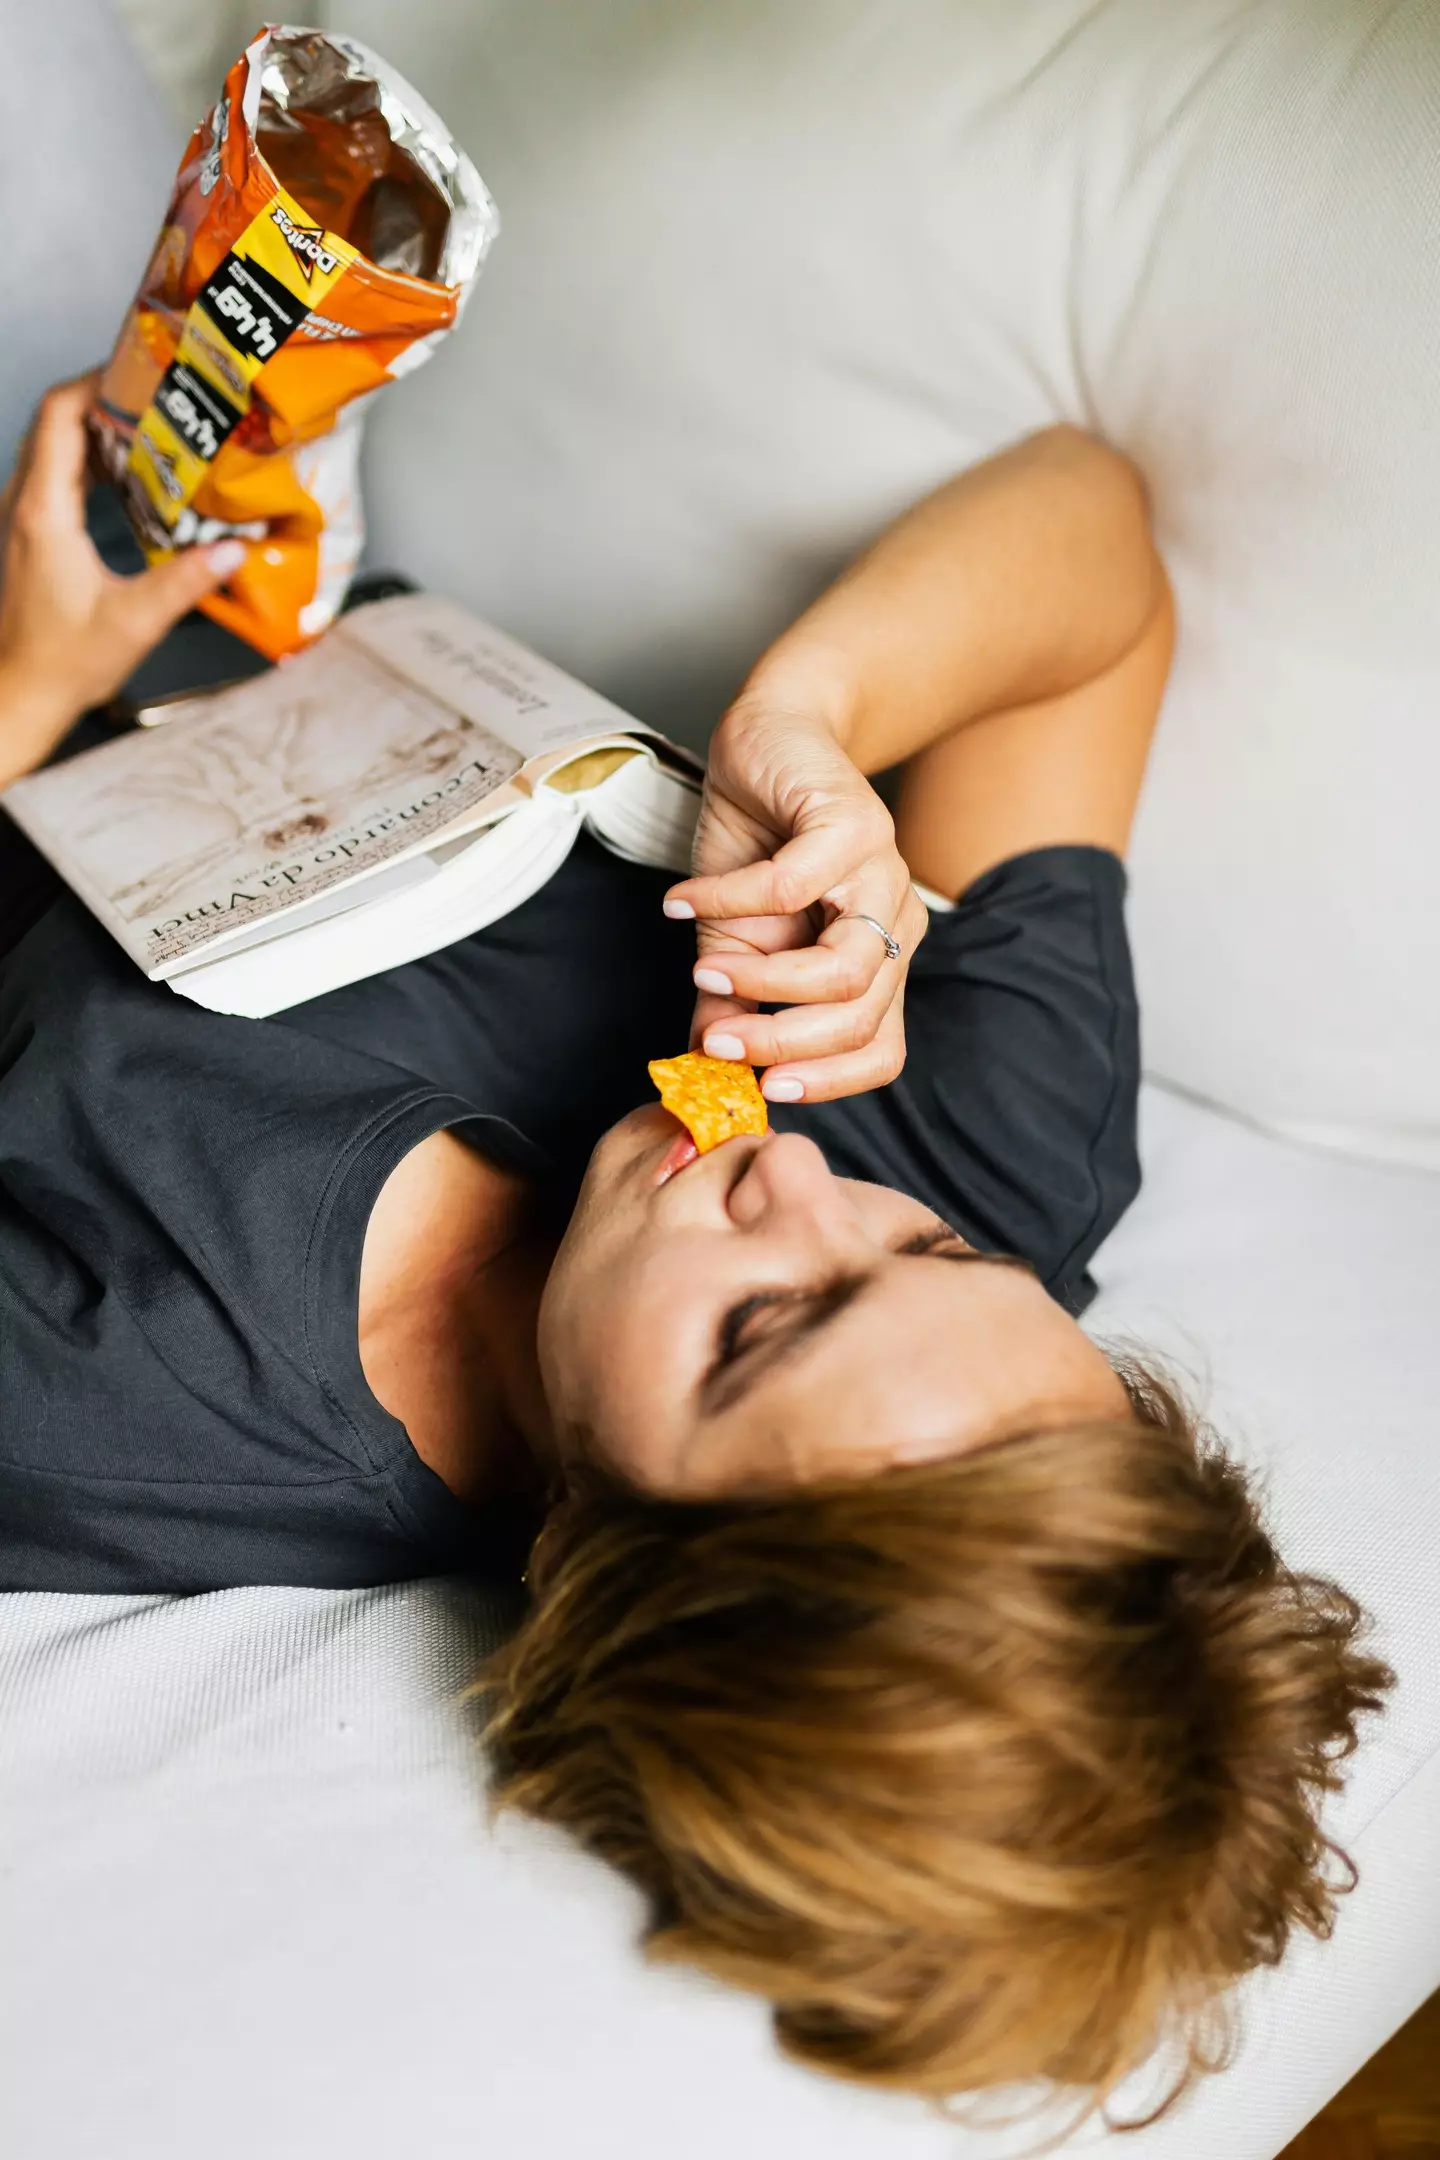 The theory indicates that if you're mindlessly stuffing yourself on Doritos you could be addicted to them but not enjoying them, and the same for your love life.